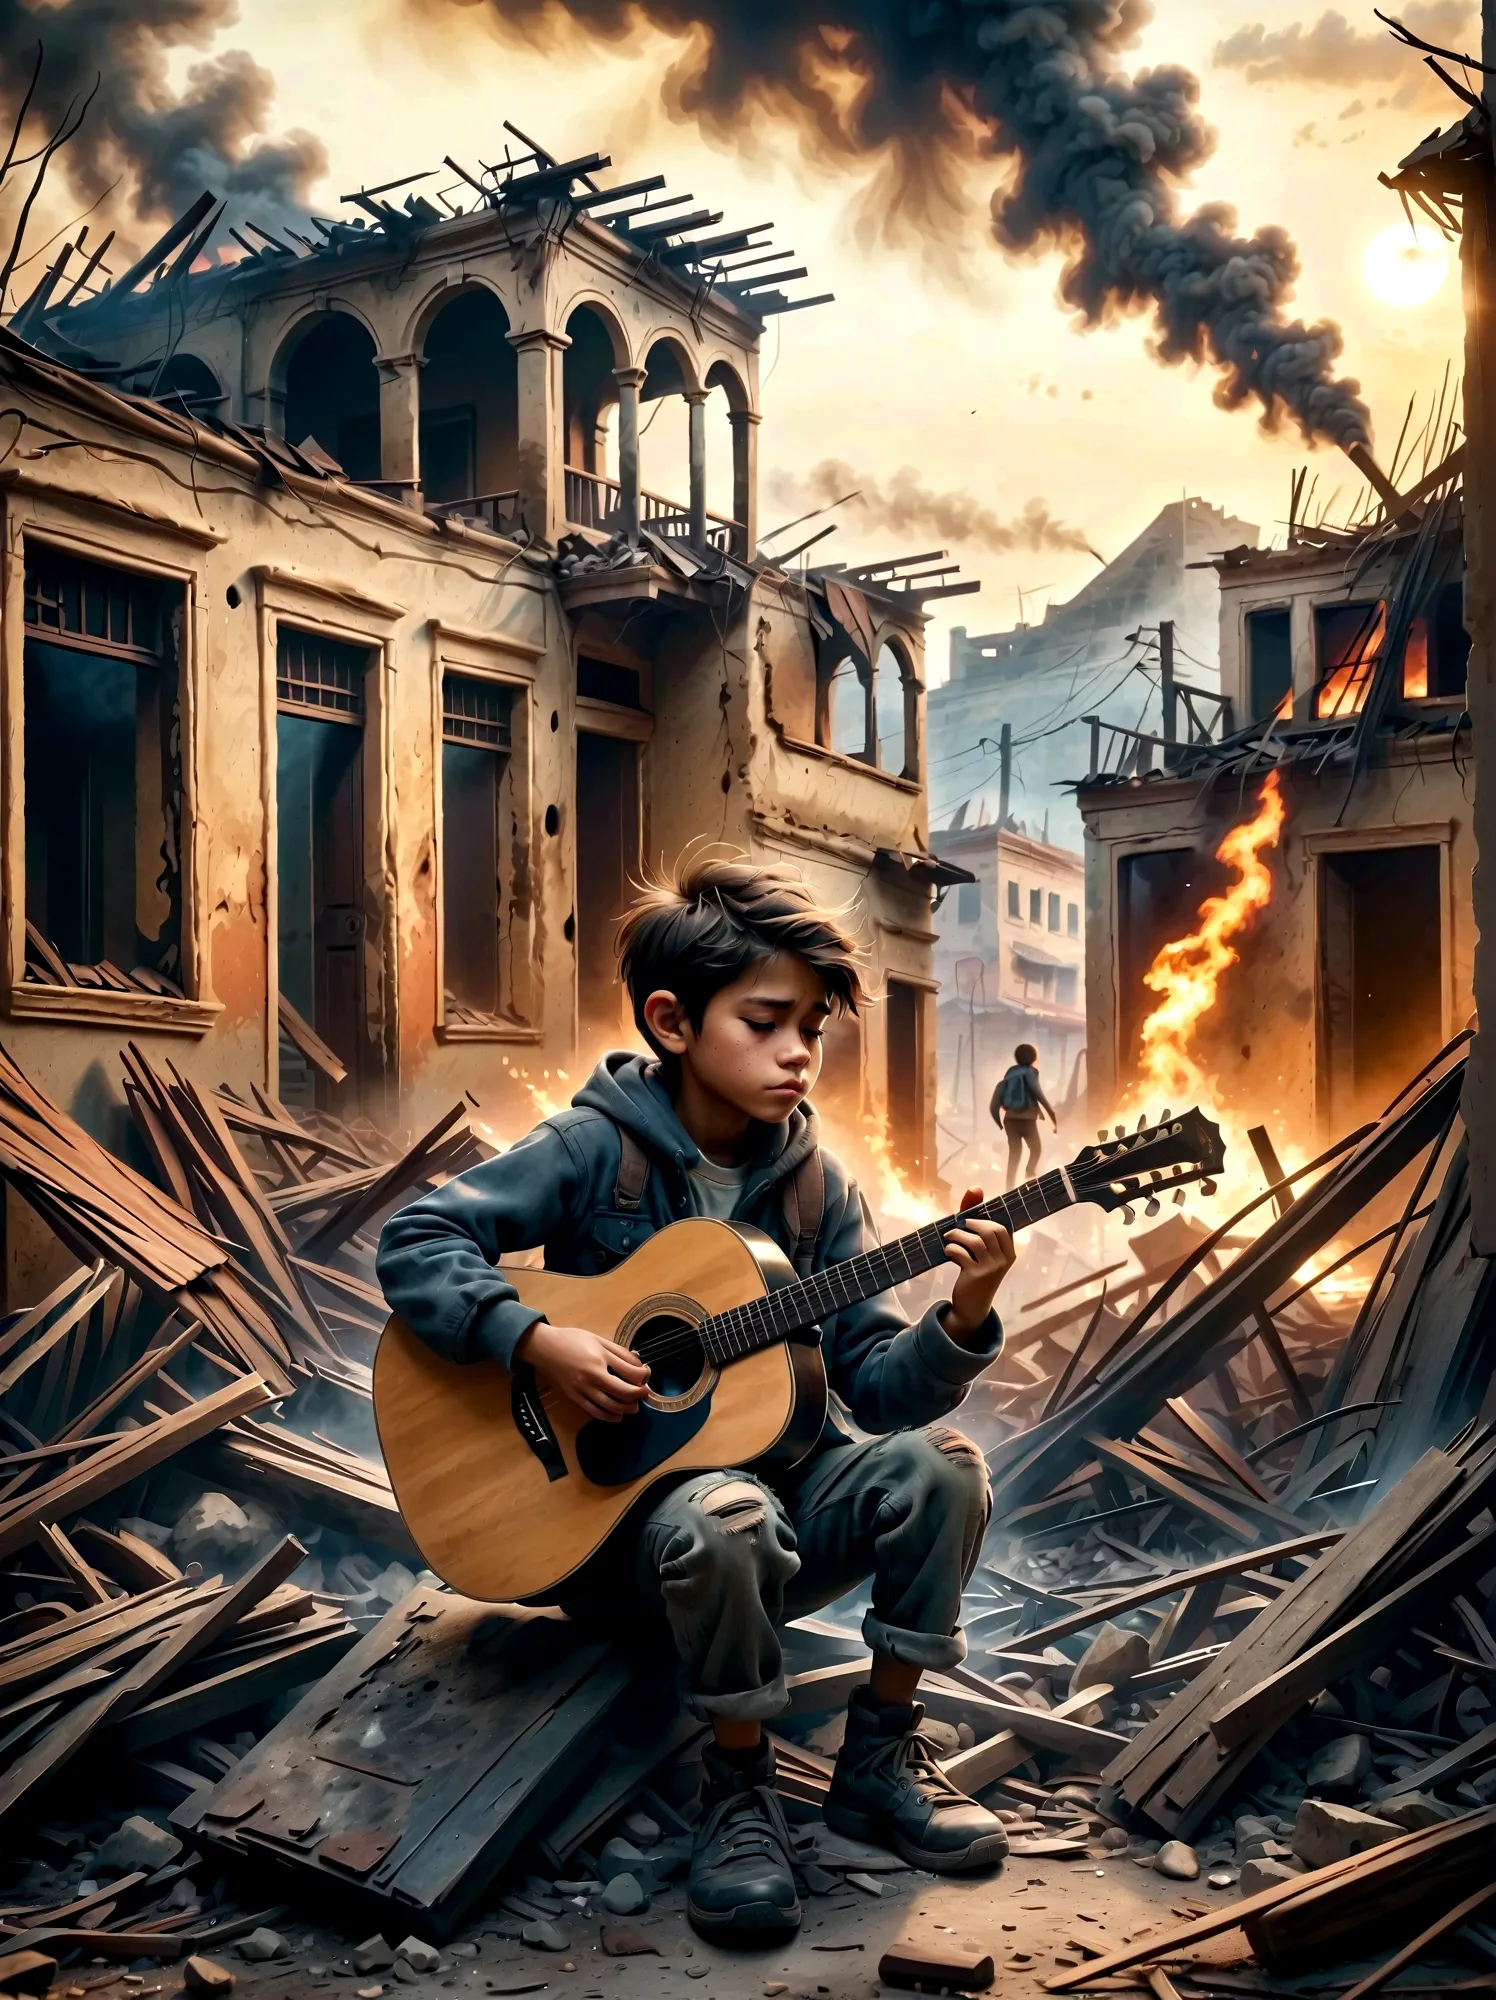 In the midst of a war-torn, smoky ruin, a  child is playing a guitar. The scene captures the stark contrast between the devastat...